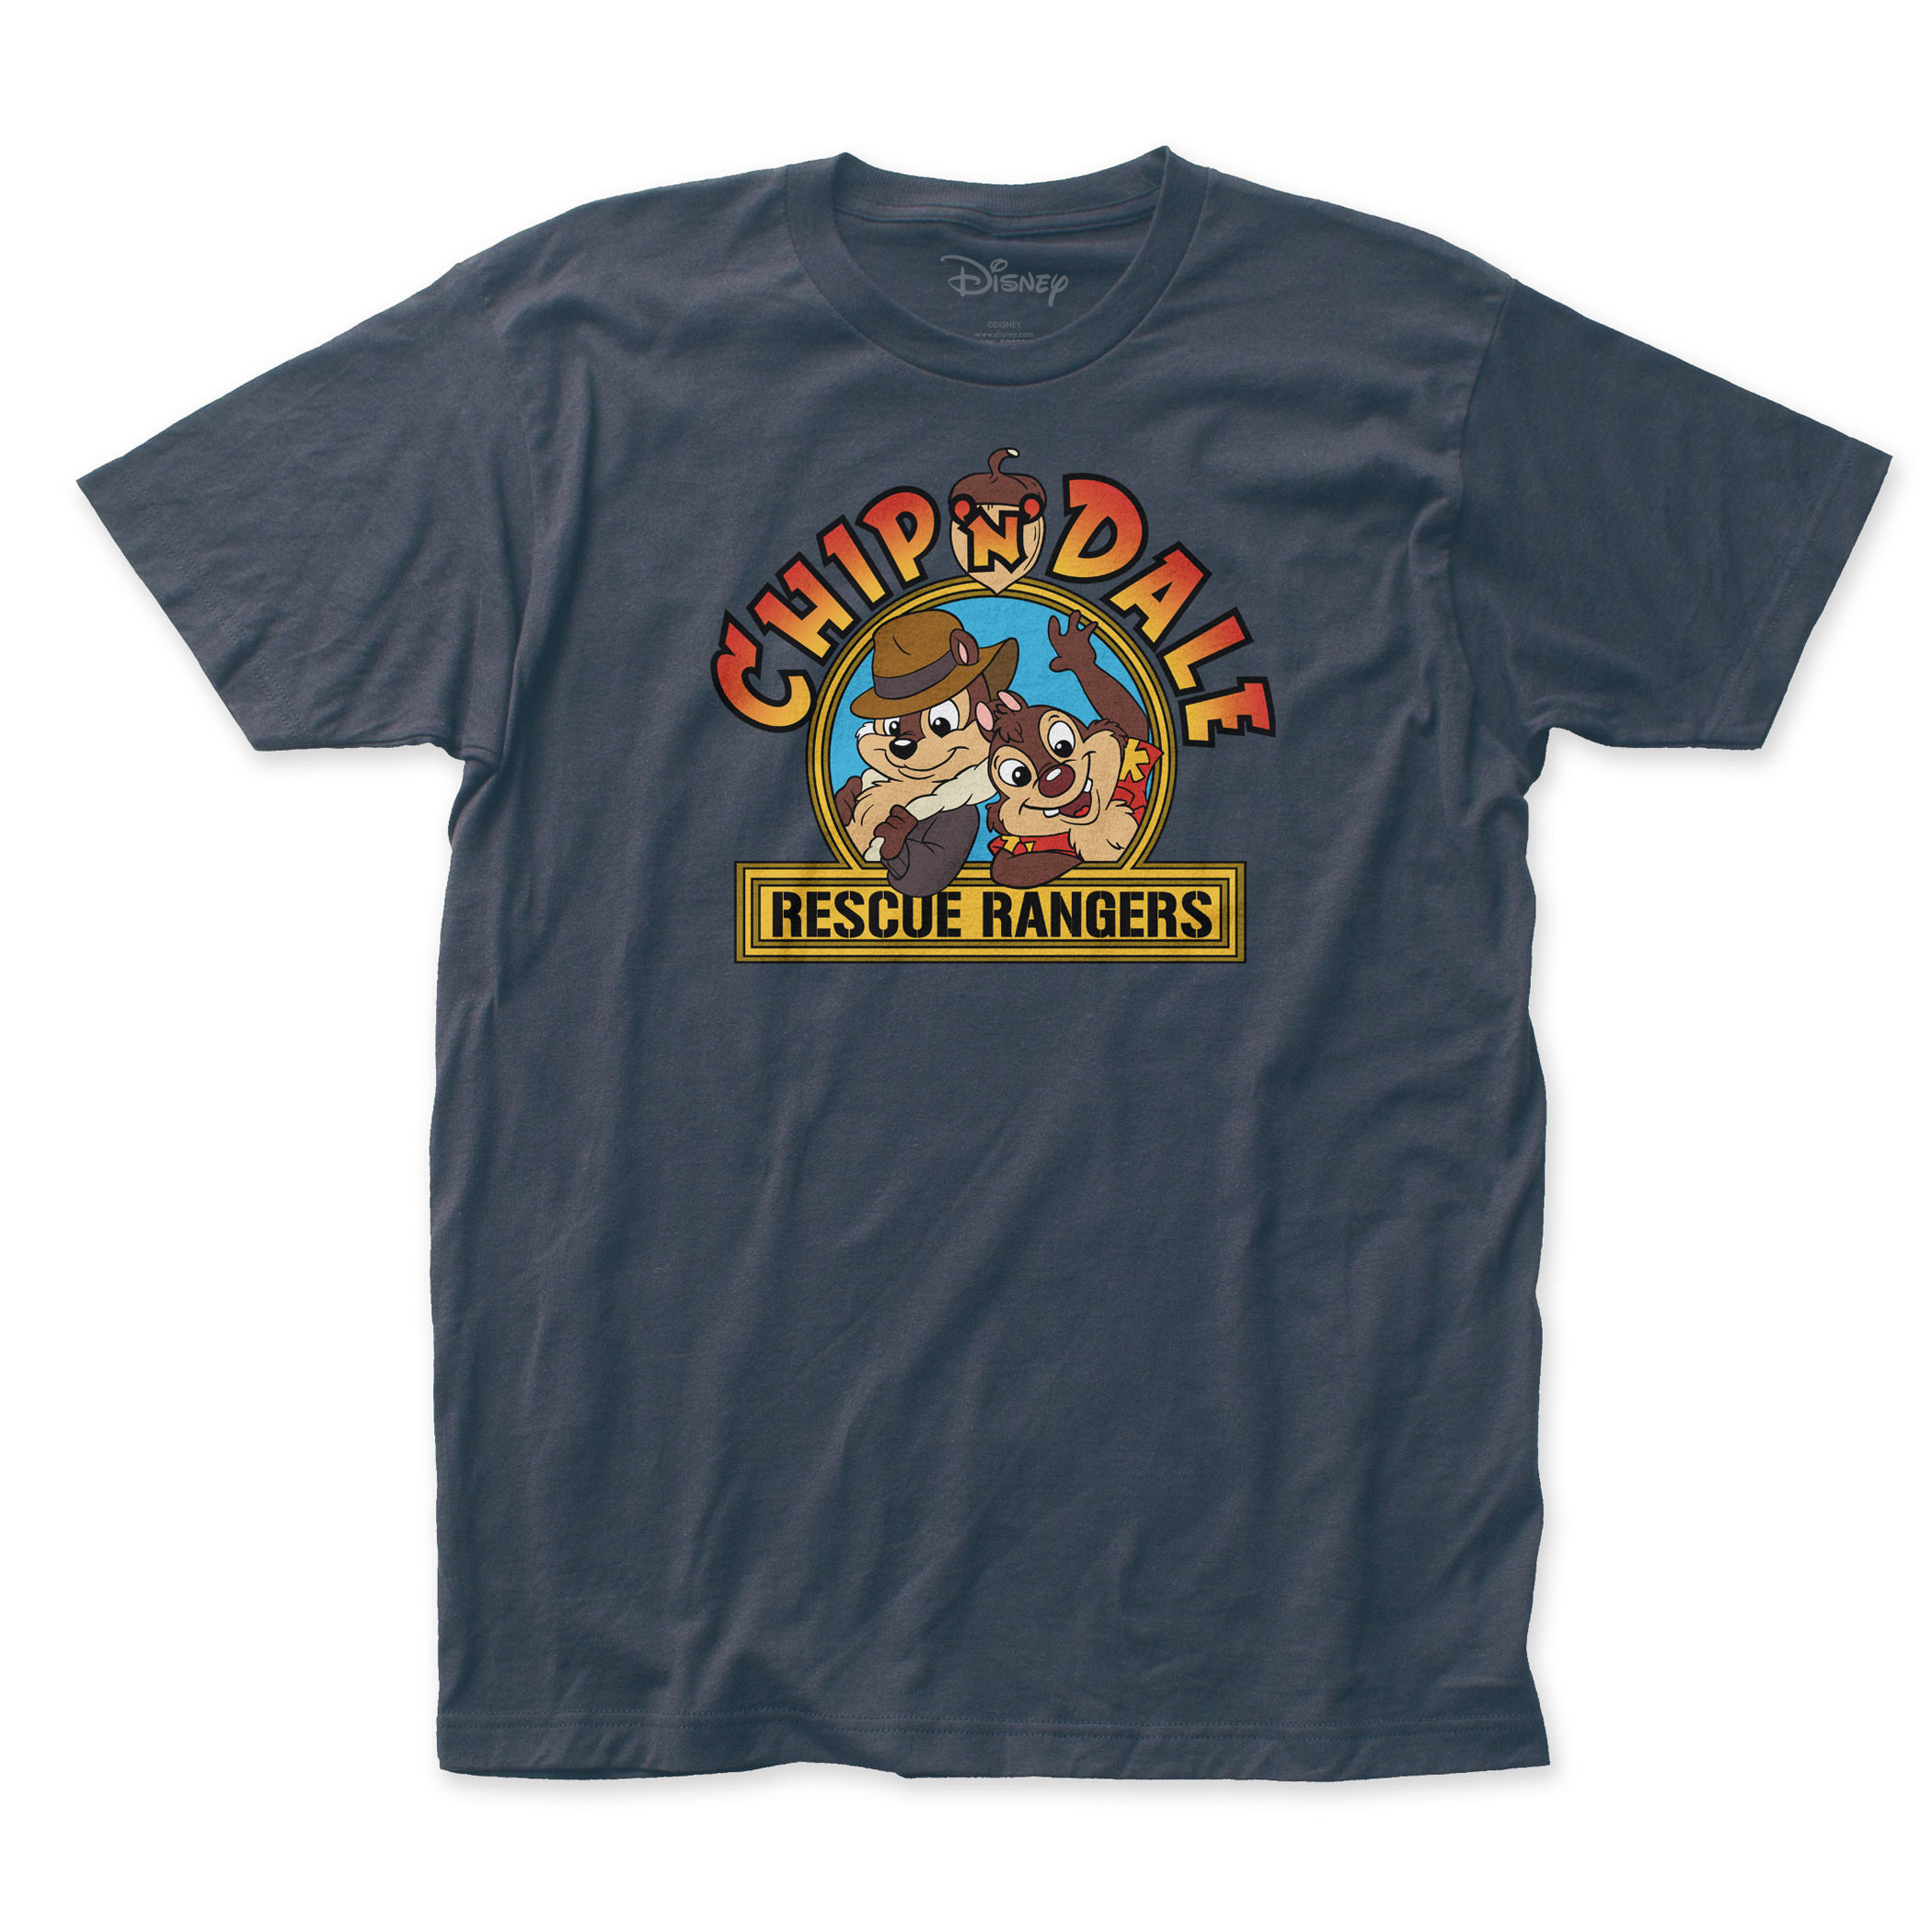 Chip and Dale Rescue Rangers Men’s Grey T-Shirt